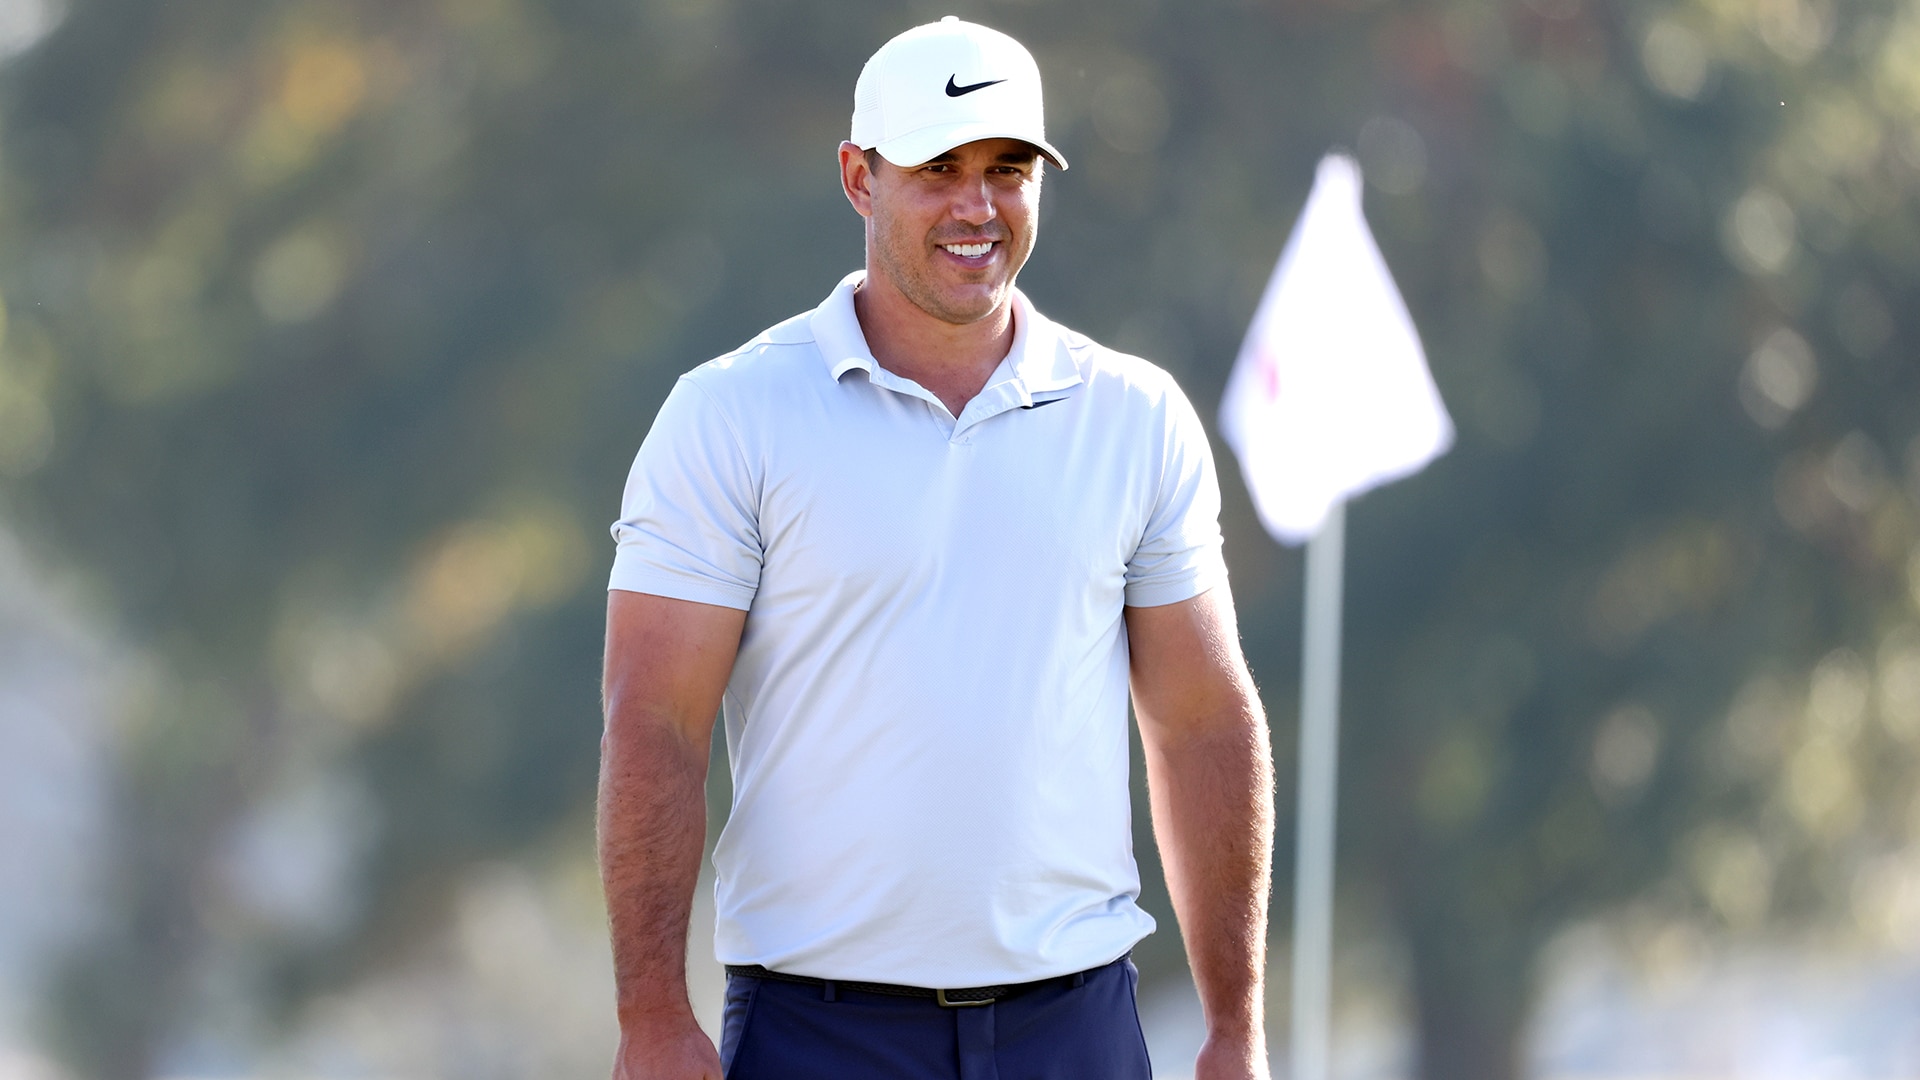 Brooks Koepka’s American Express debut tied into prep for U.S. Open